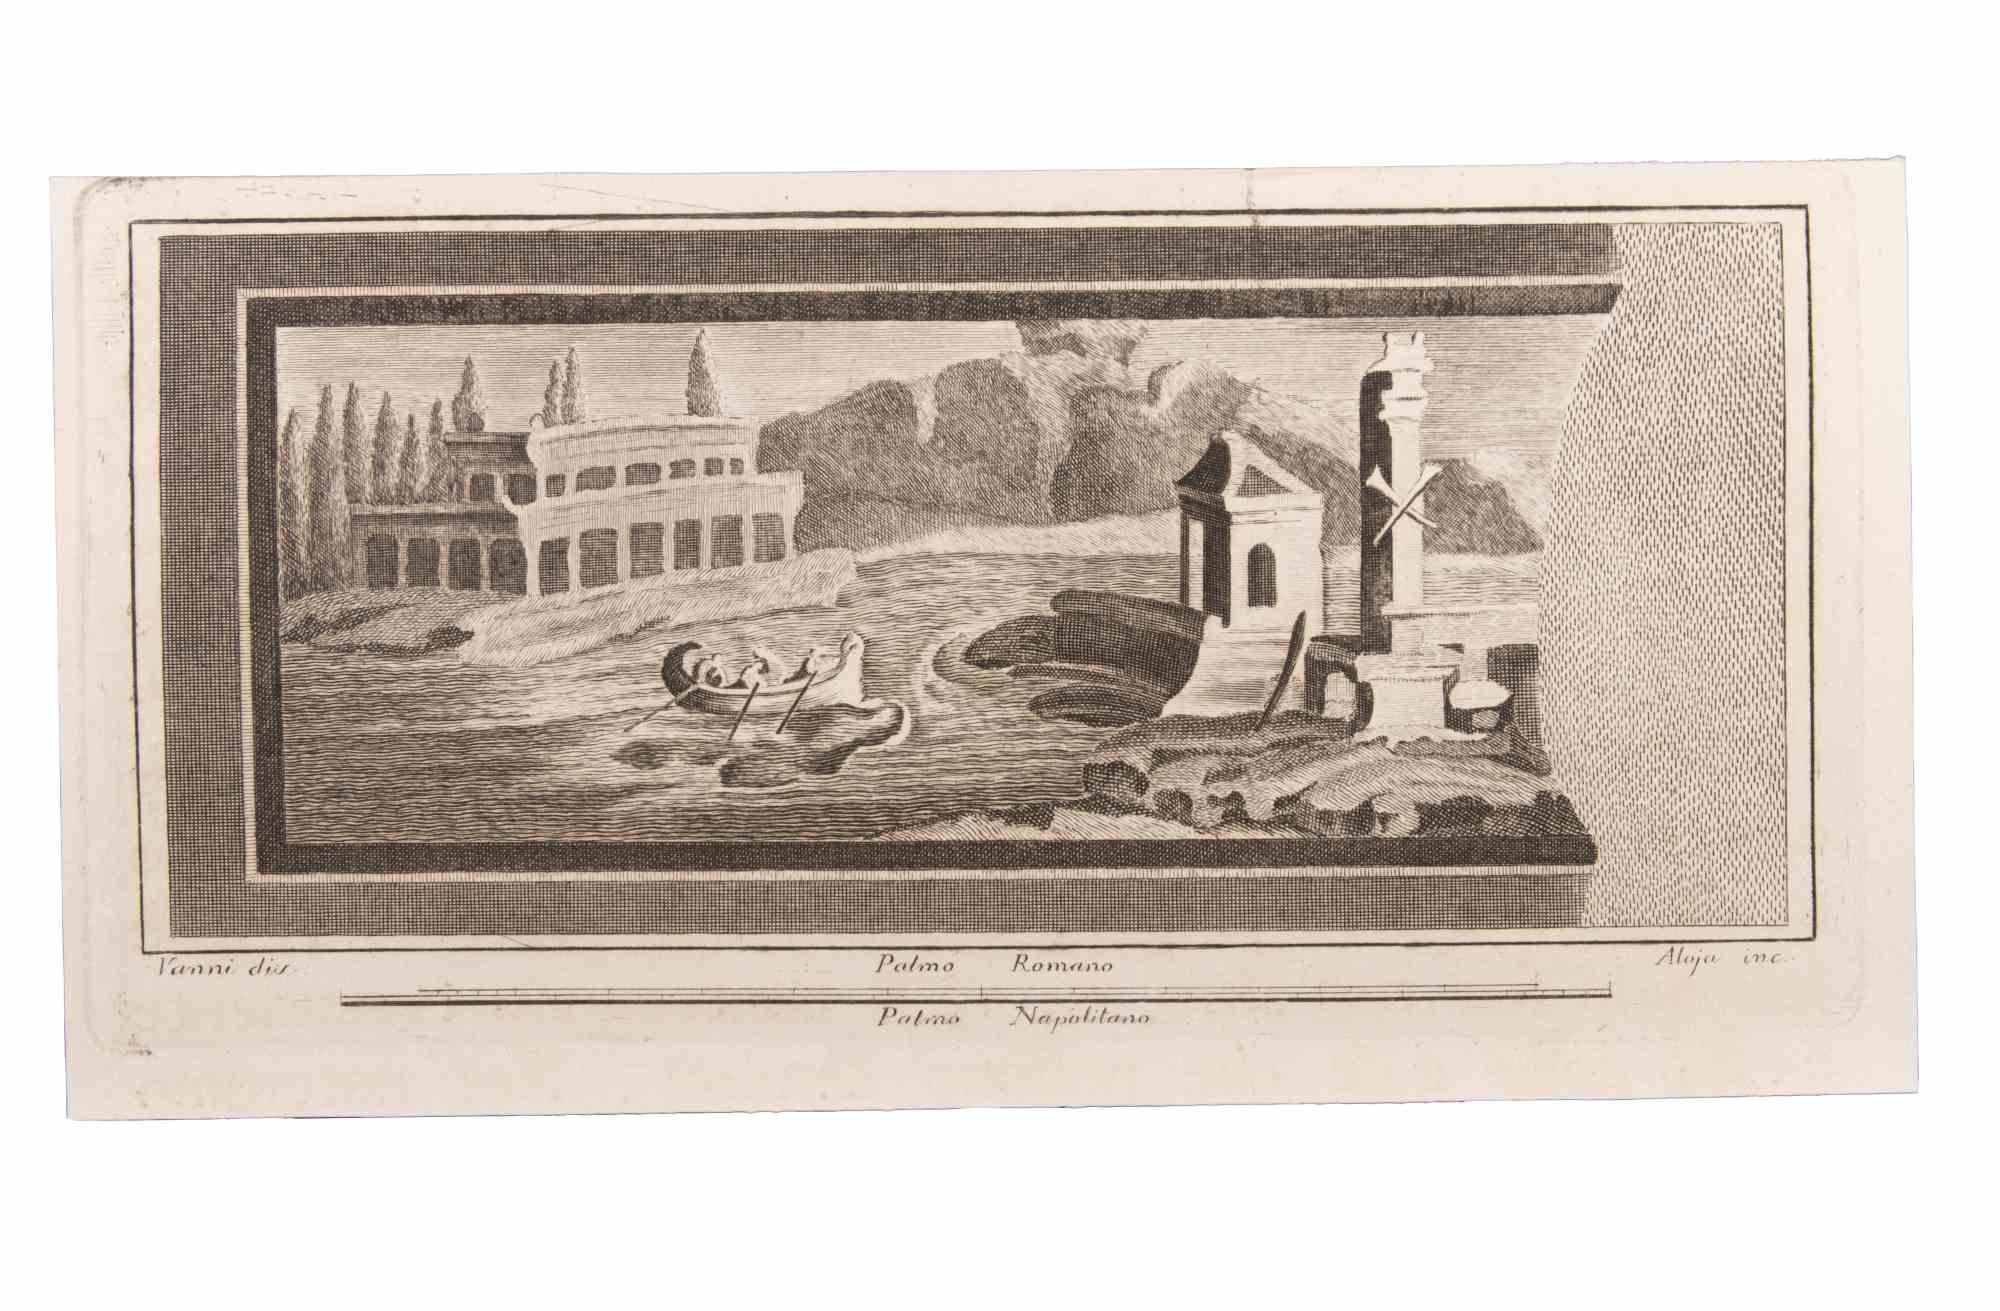 Seascape with Monument and Figures - Etching by Luigi Aloja - 18th Century